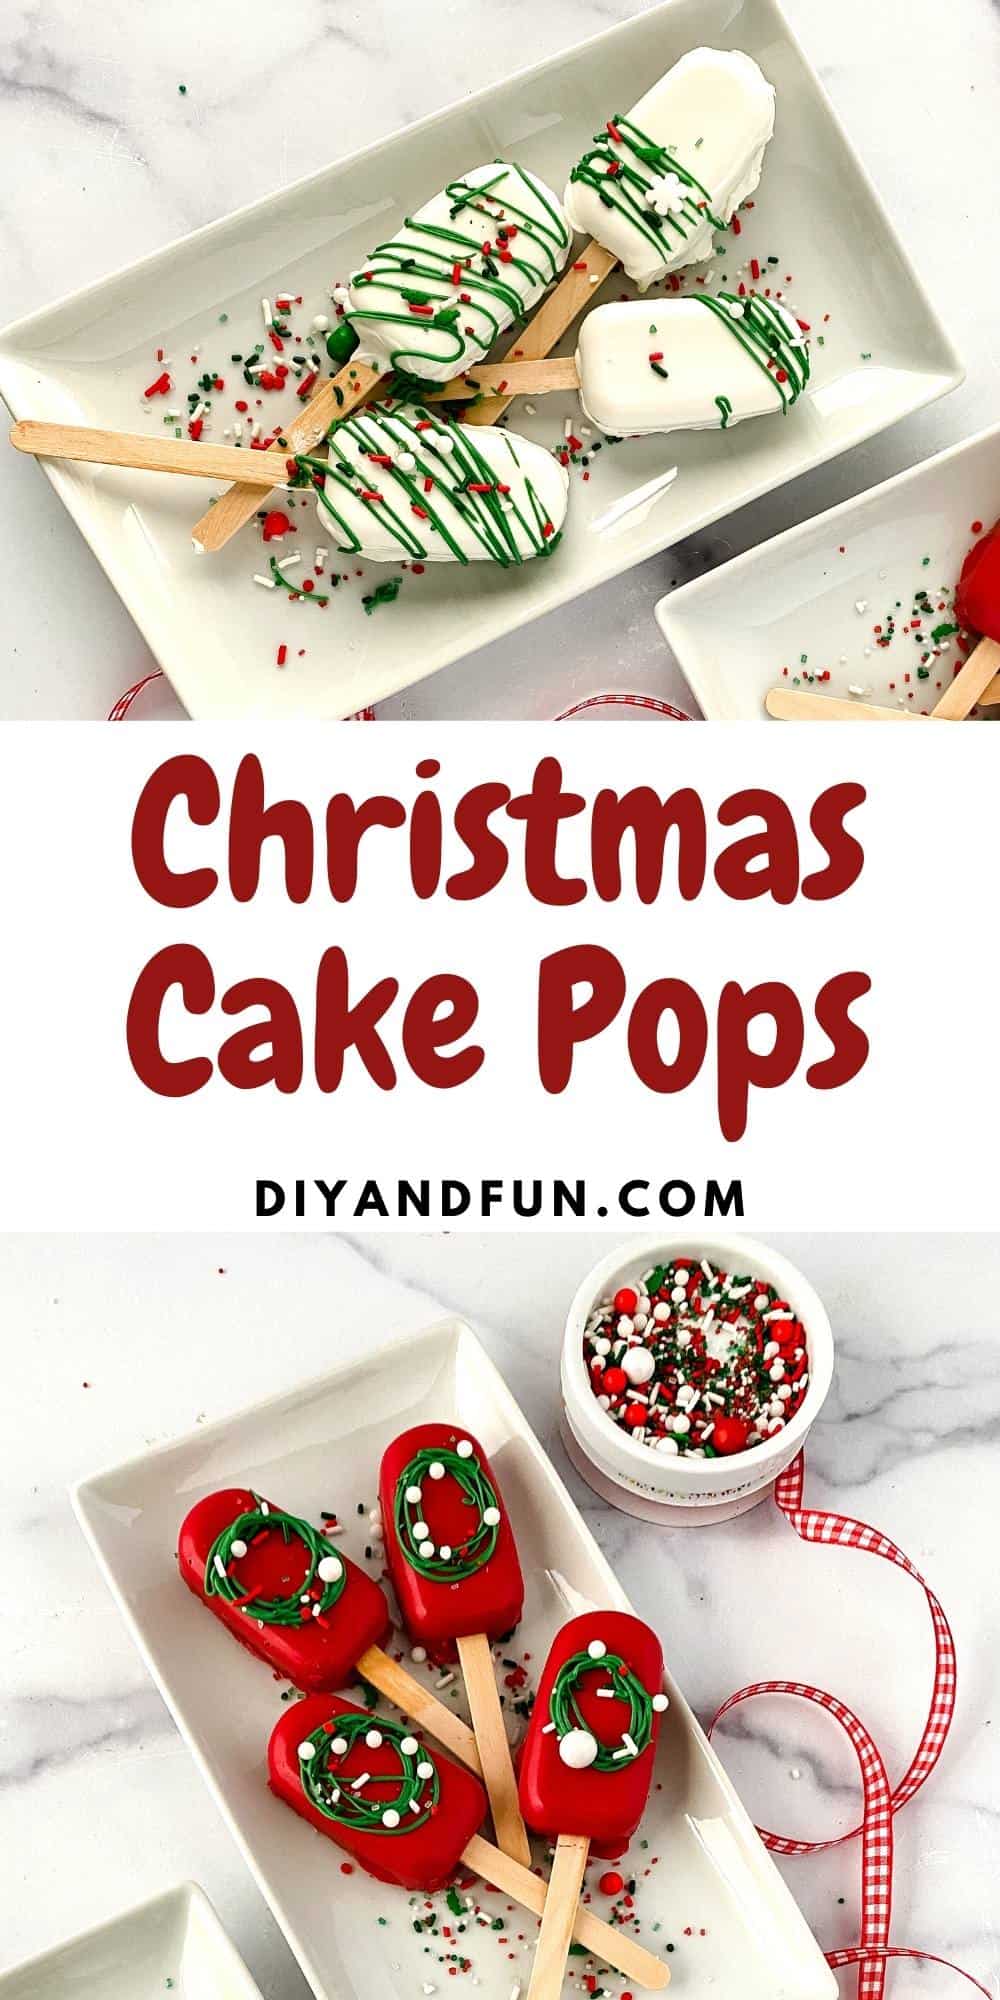 This easy recipe for Christmas Cake Pops is perfect for most any holiday party, gathering, or dessert treat.